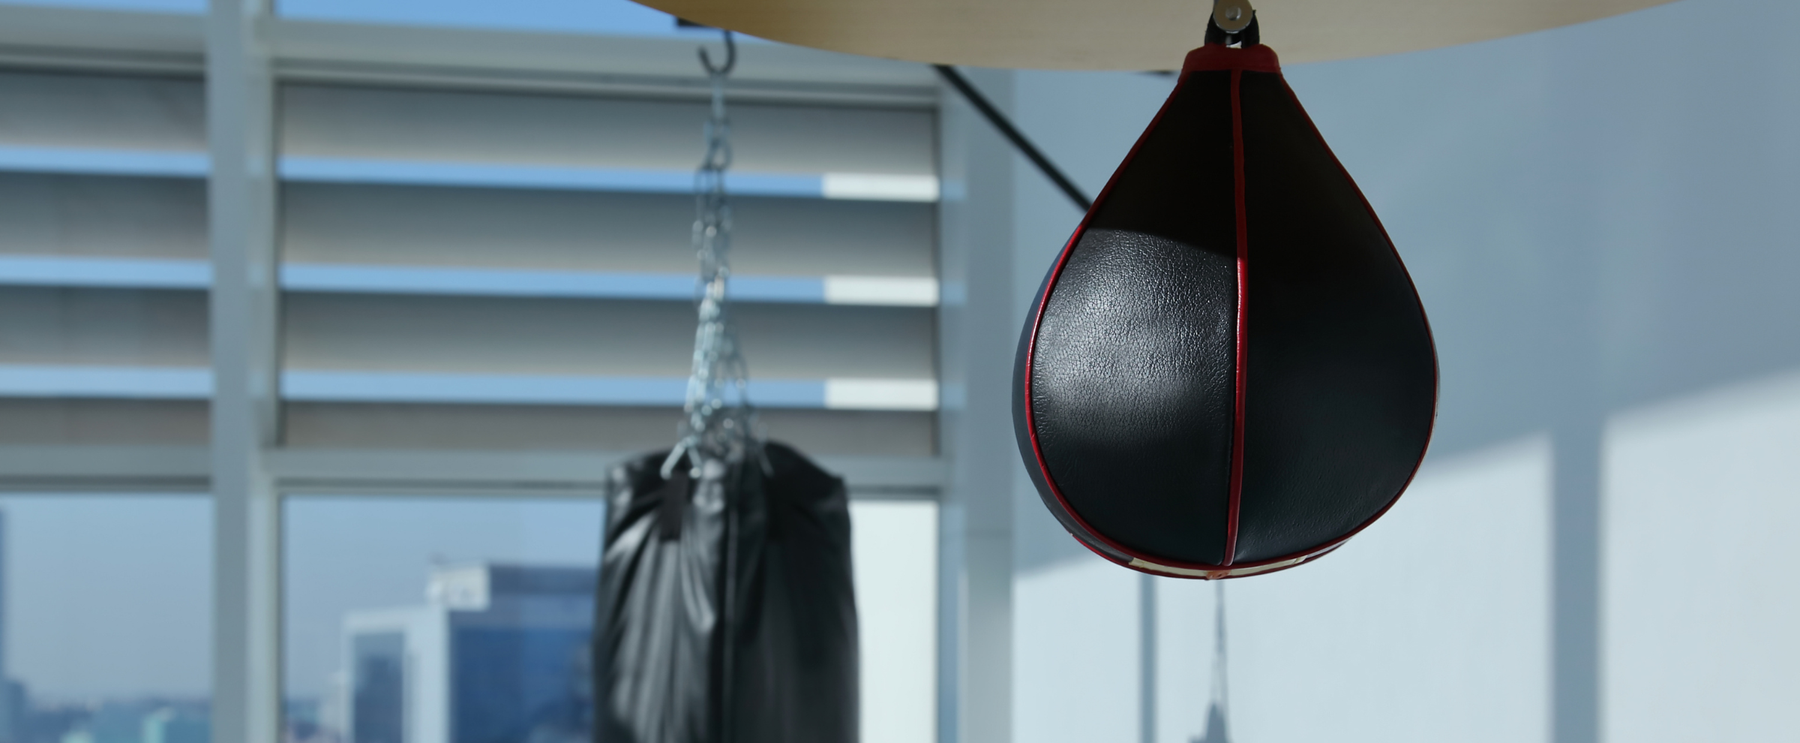 FightCamp - The benefits and uses of multi-station boxing stands